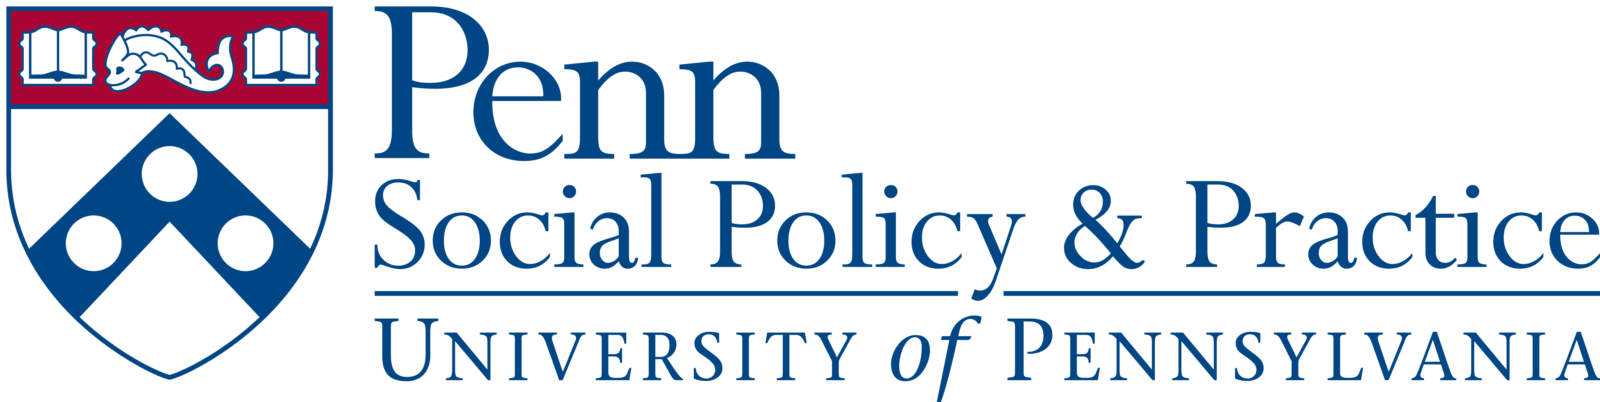 Home - School of Social Policy & Practice